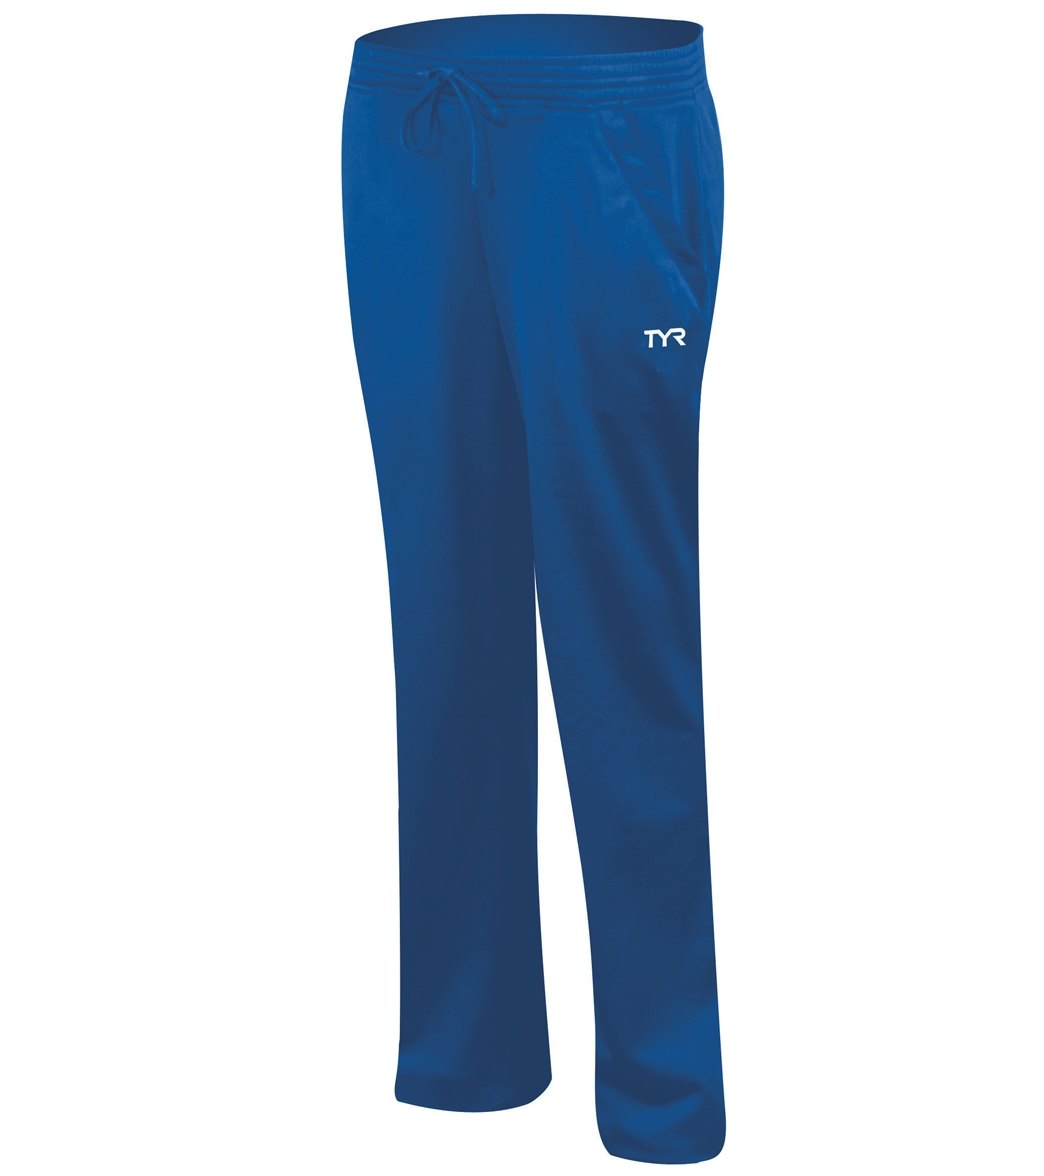 TYR Alliance Victory Women's Warm Up Pants - Royal Large Polyester - Swimoutlet.com